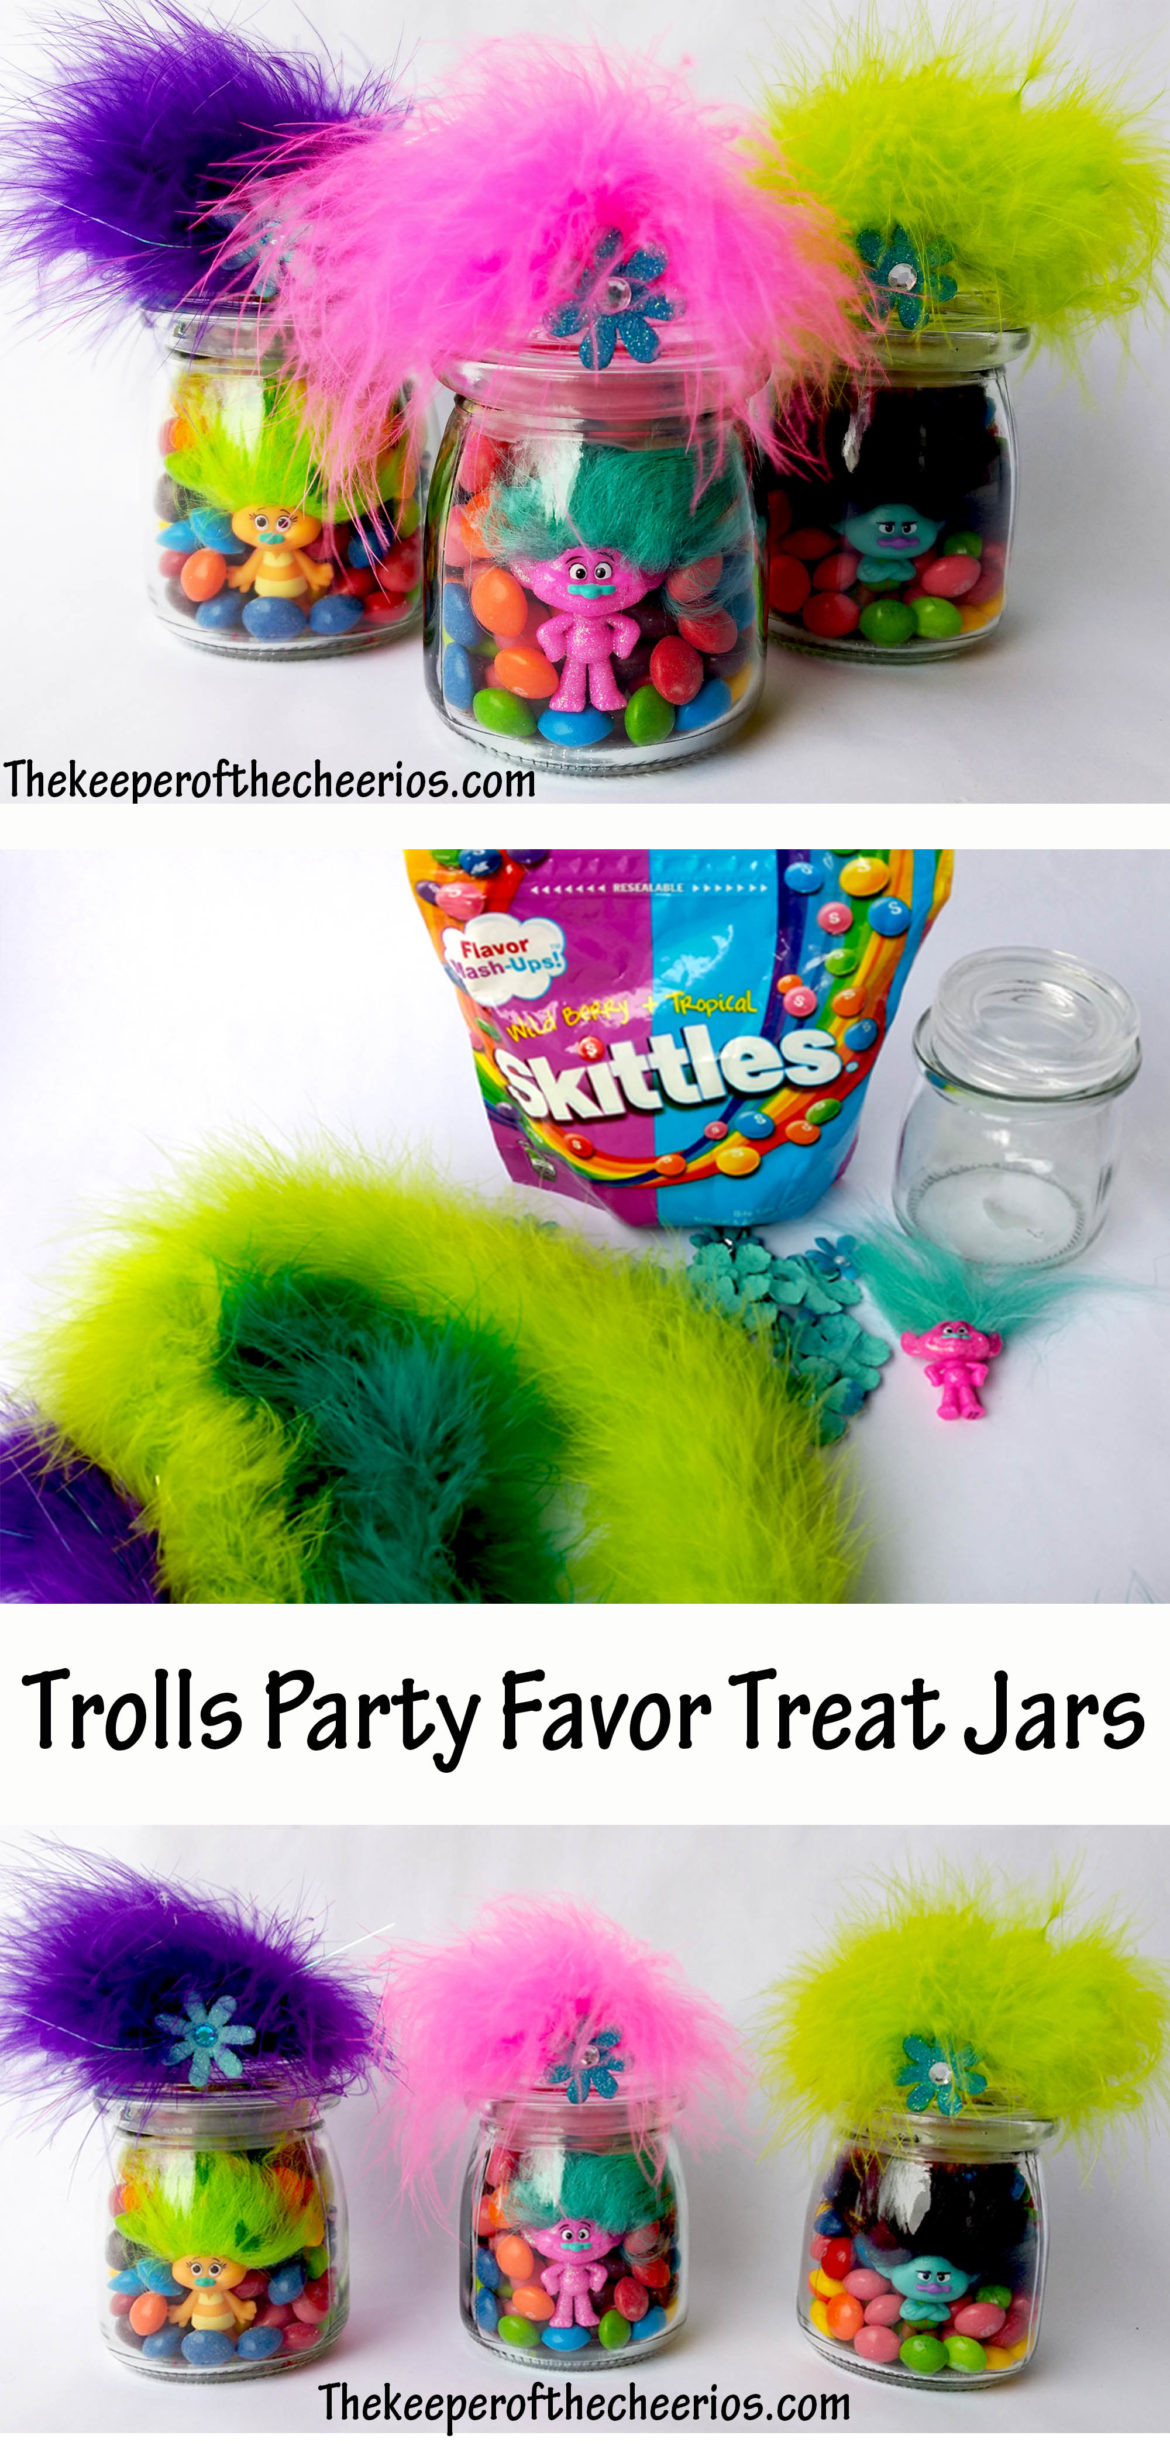 Trolls Party Favor Ideas
 Trolls Party Favor Treat Jars The Keeper of the Cheerios